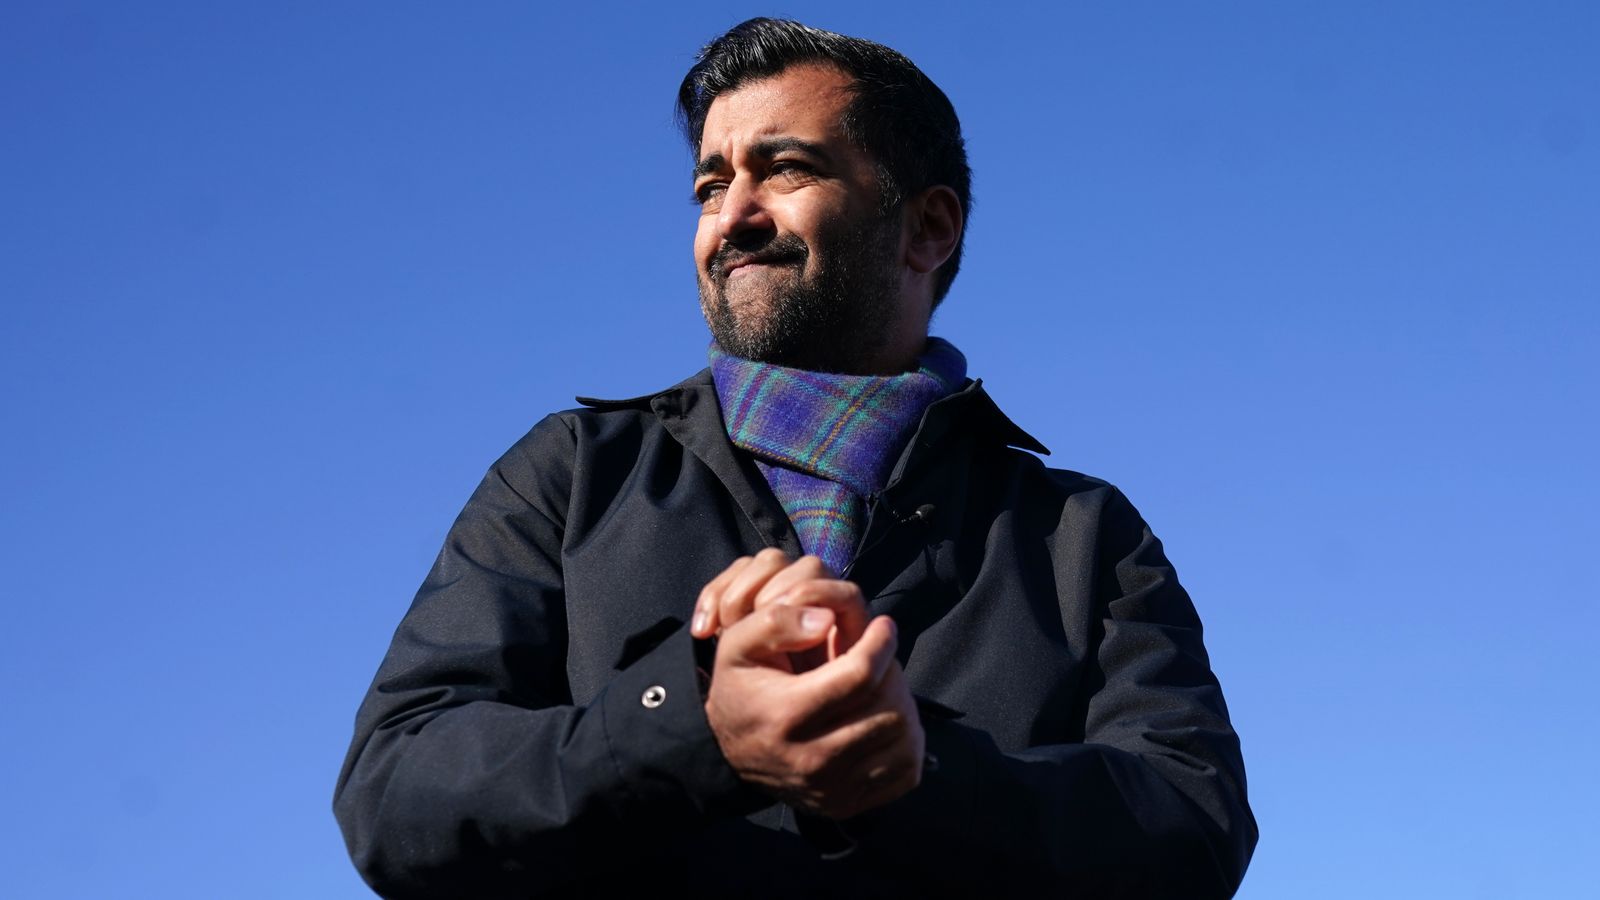 First Minister Humza Yousaf condemns racist graffiti aimed at him near Dundee home